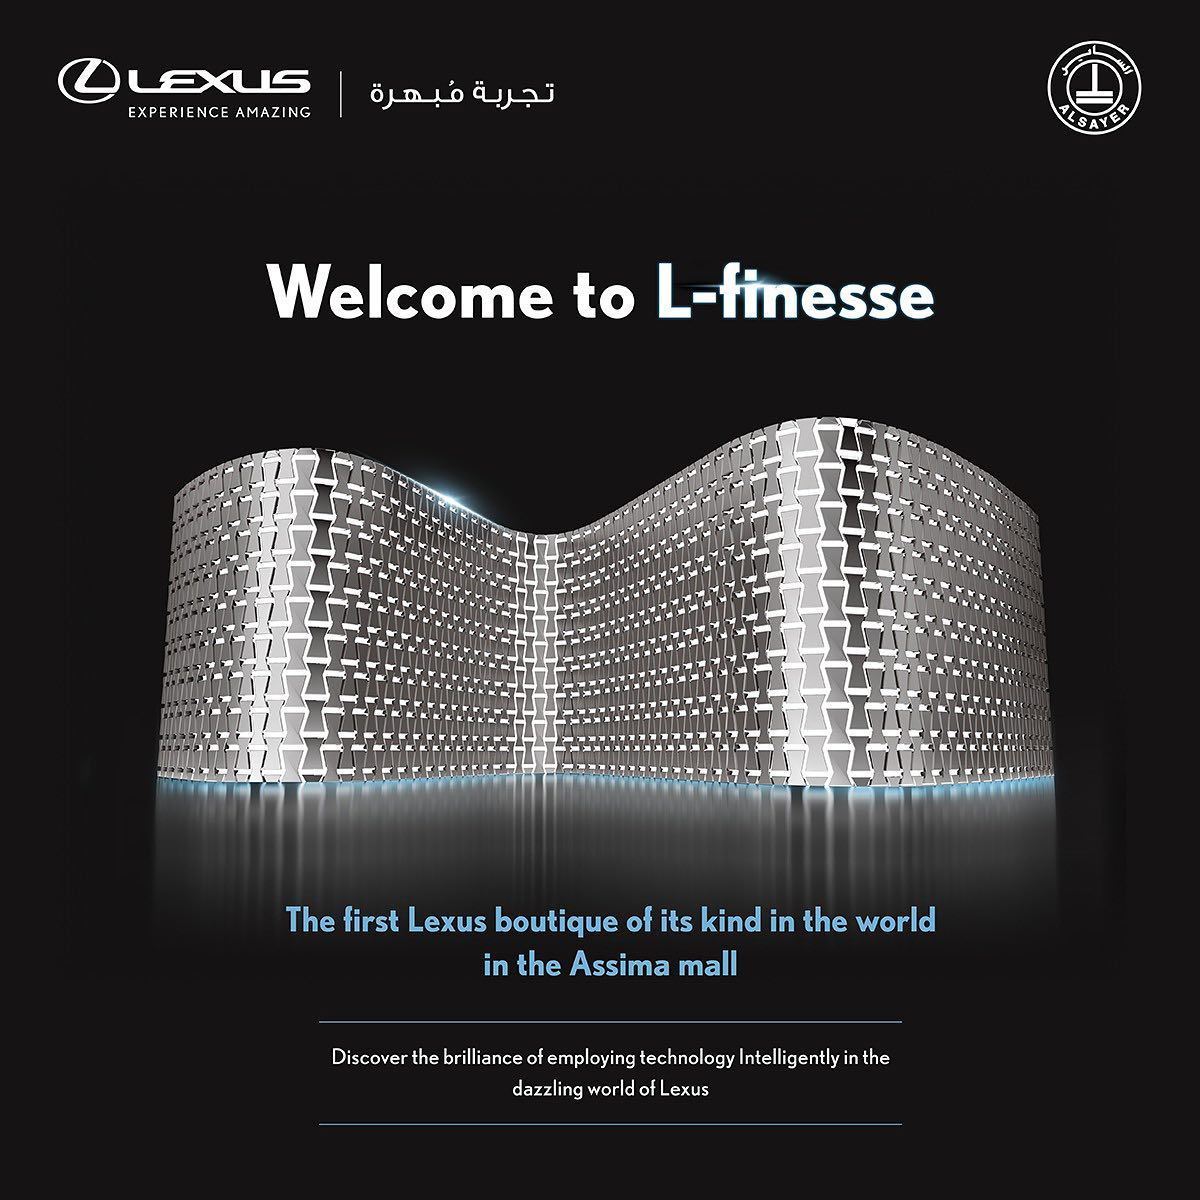 Lexus AlSayer opens "L-finesse" boutique in Assima Mall Kuwait